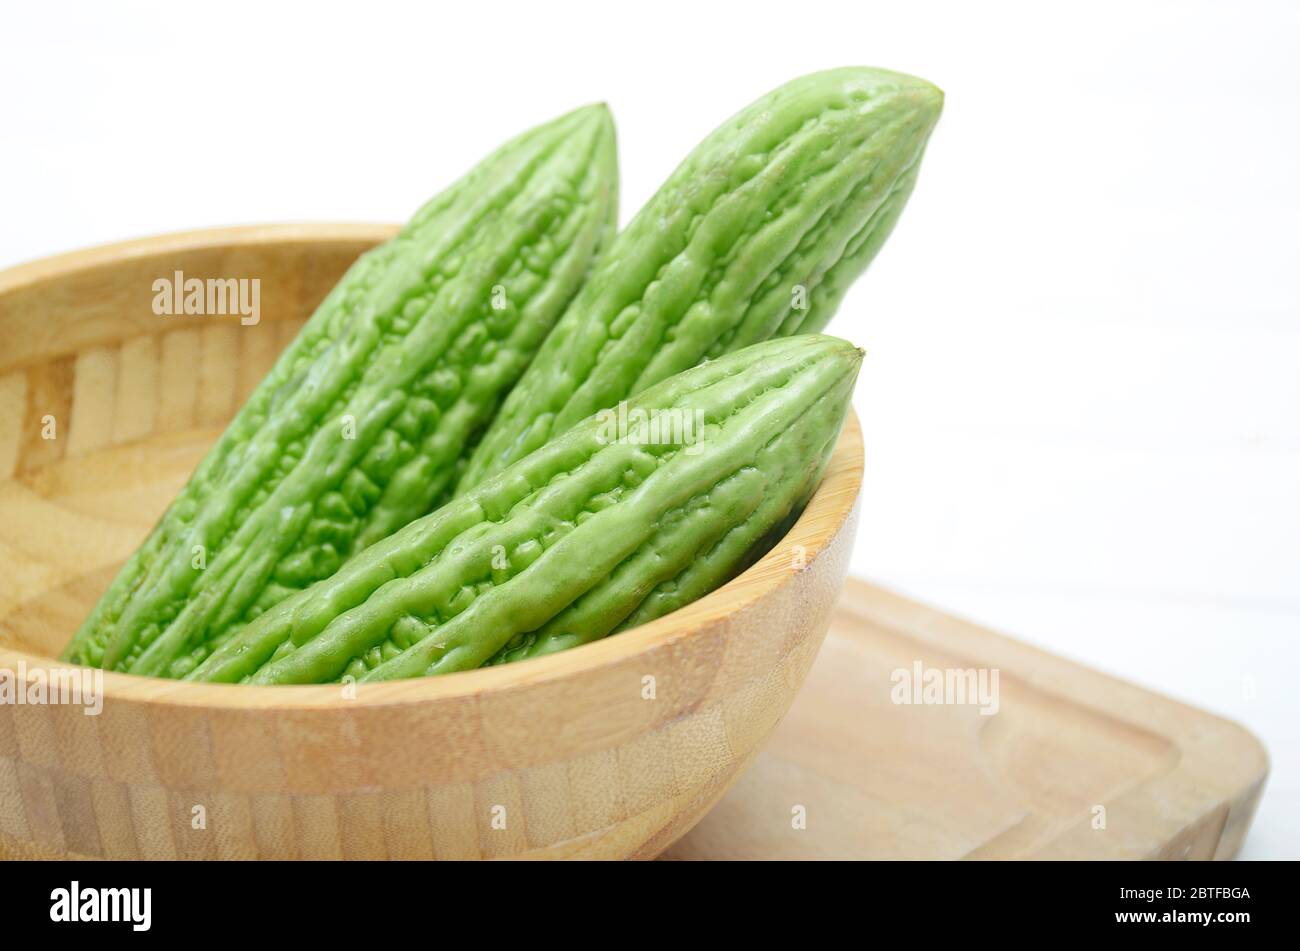 Green Organic Bitter melon in the wooden bowl. Bitter melon good for diabetic, can reduce Blood Sugar and can decrease Cholesterol Levels Stock Photo